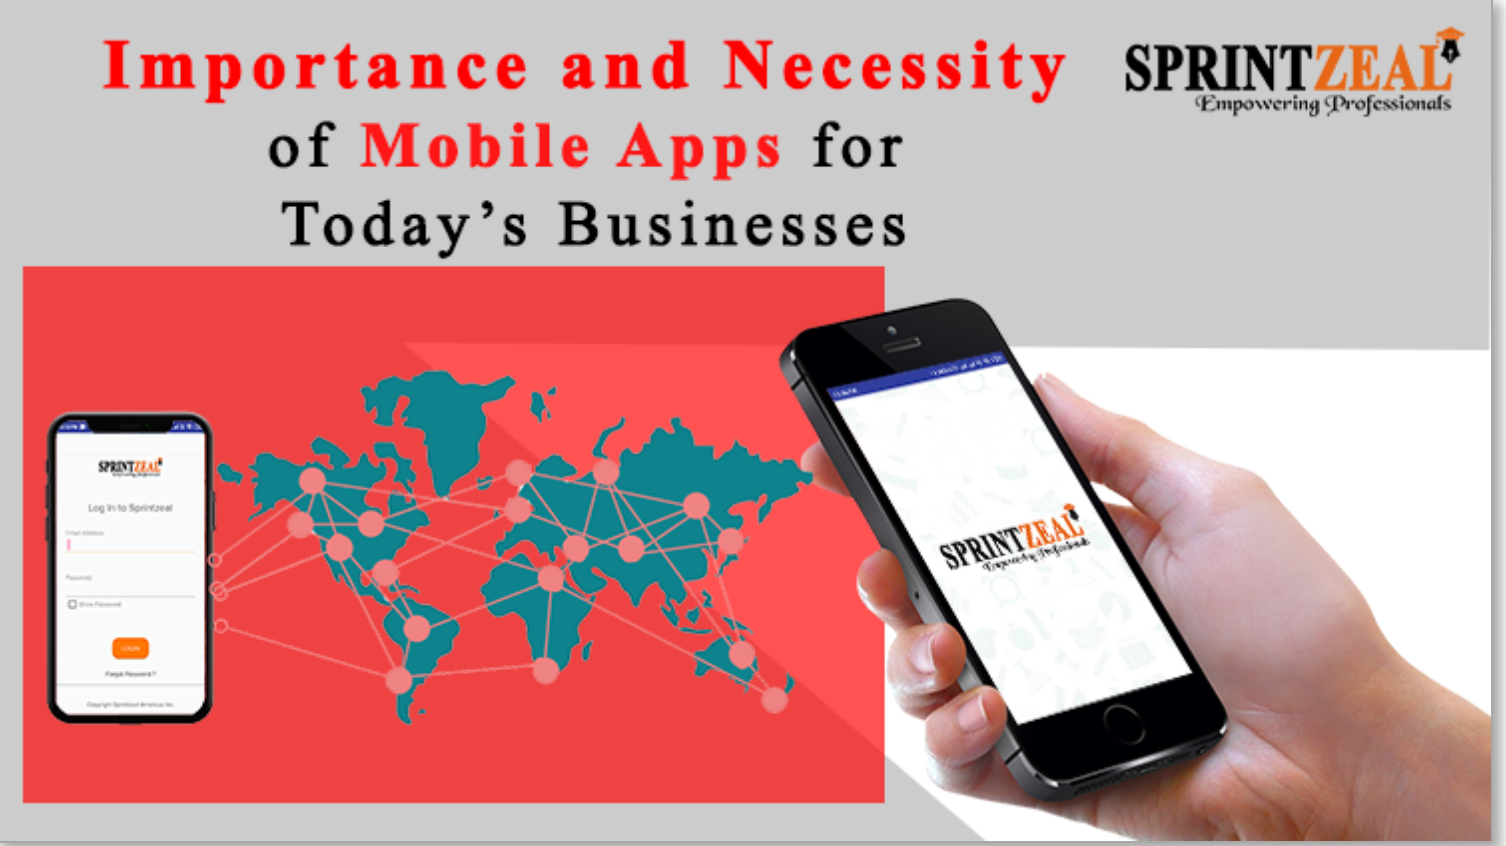 Sprintzeal Mobile business courses